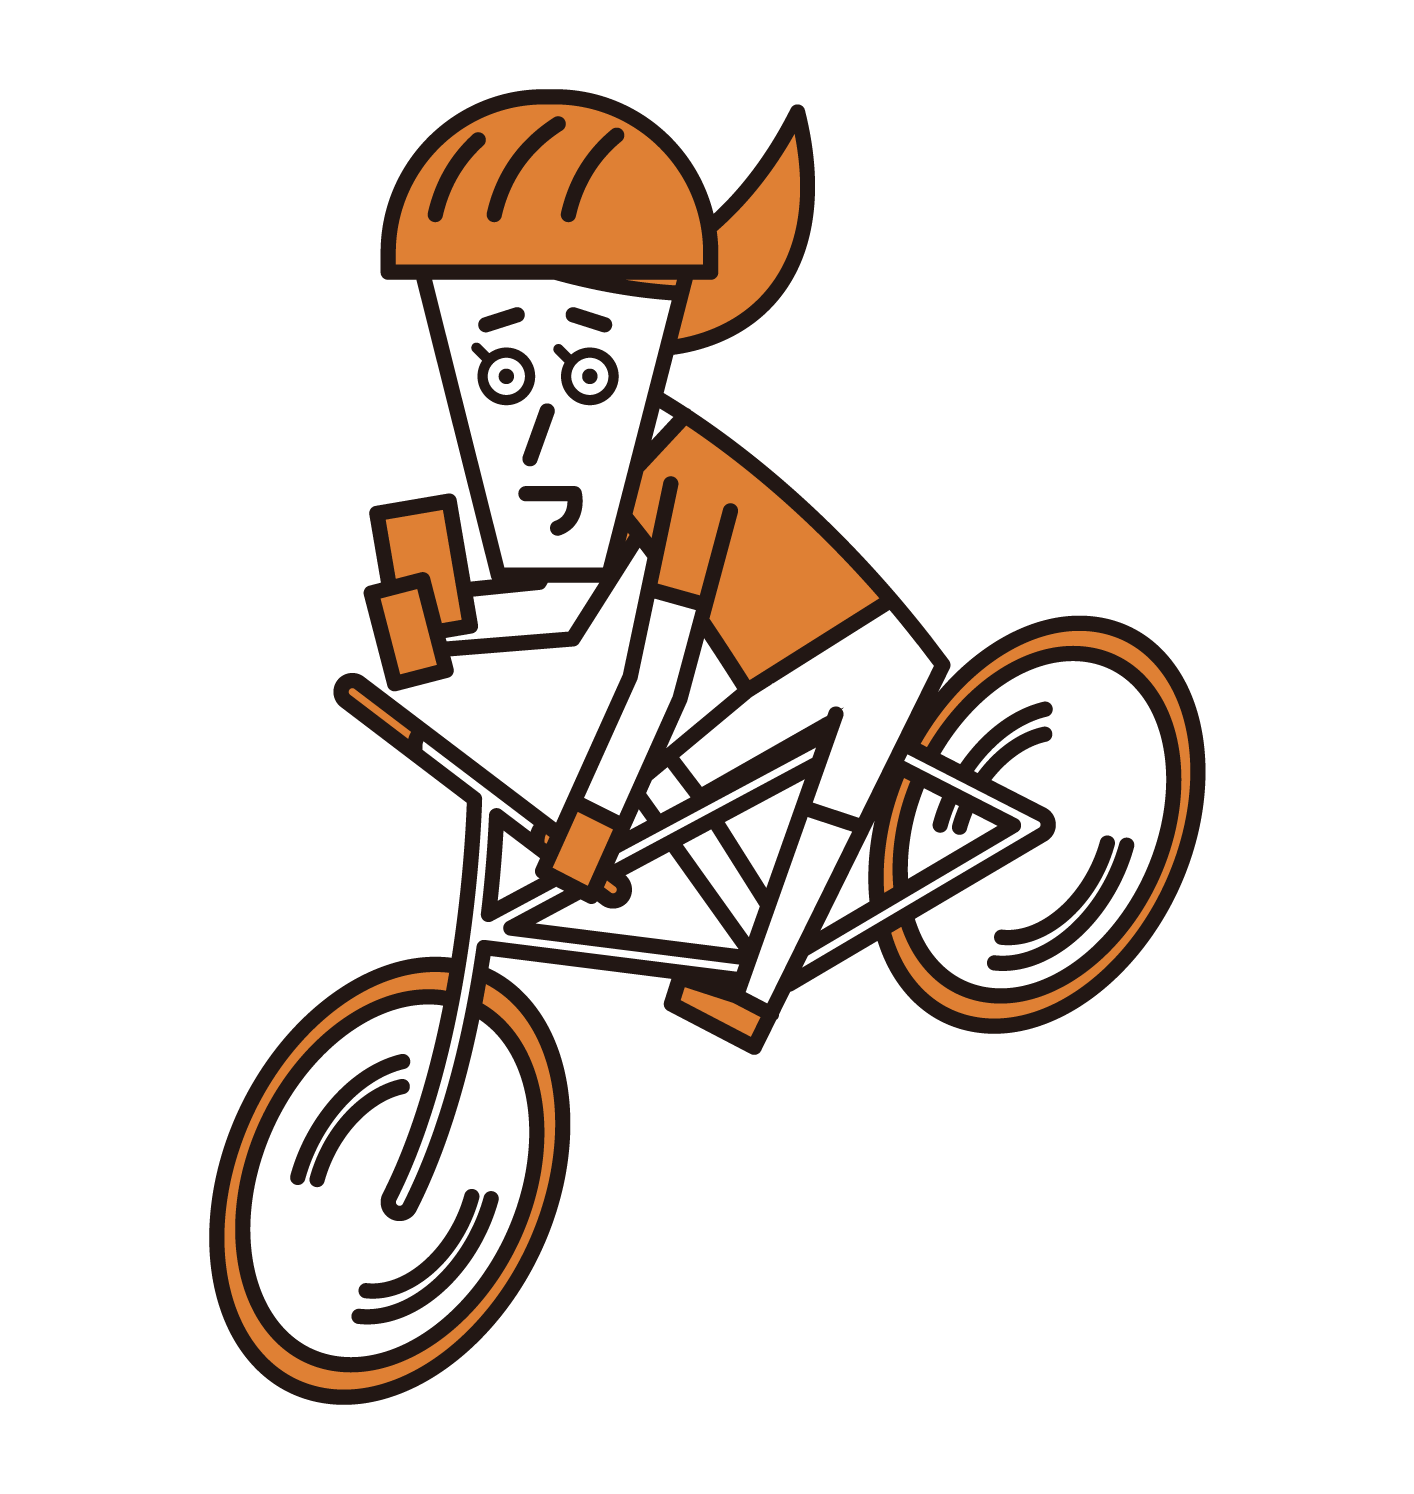 Illustration of a person (woman) driving a bicycle while operating a smartphone